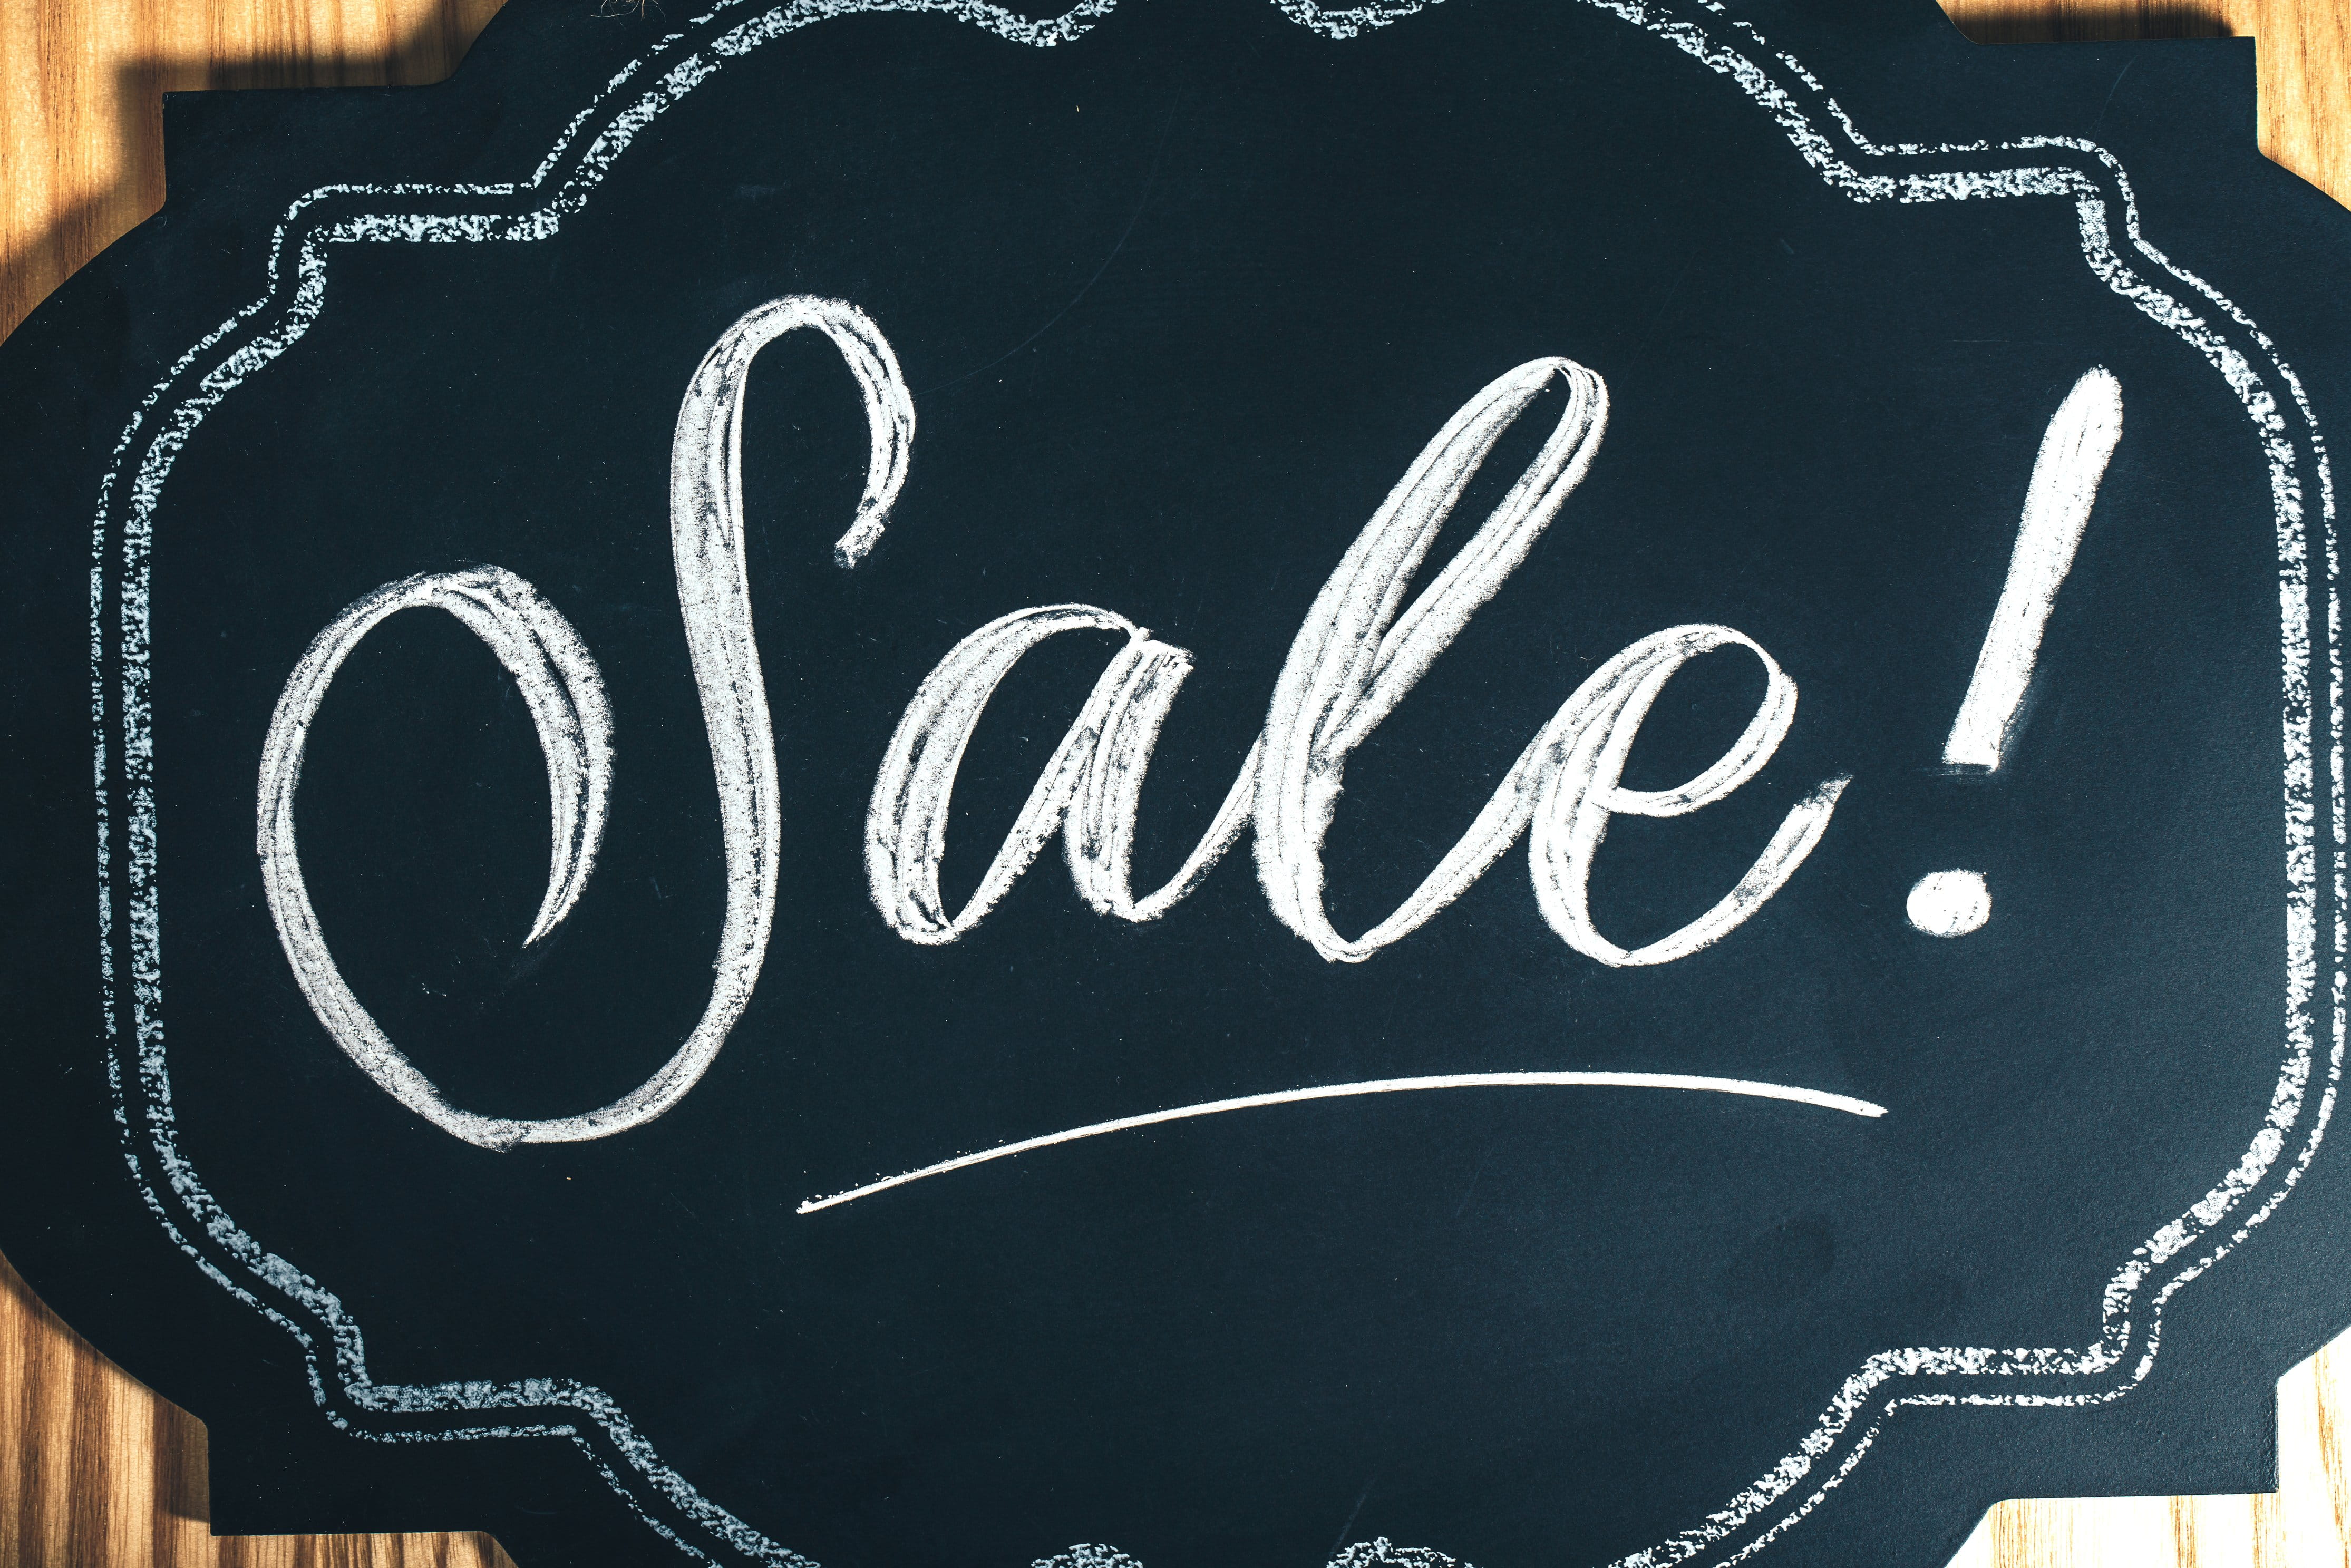 Sale Sign In Chalk Photo, Flatlay, Black Friday Cyber Monday